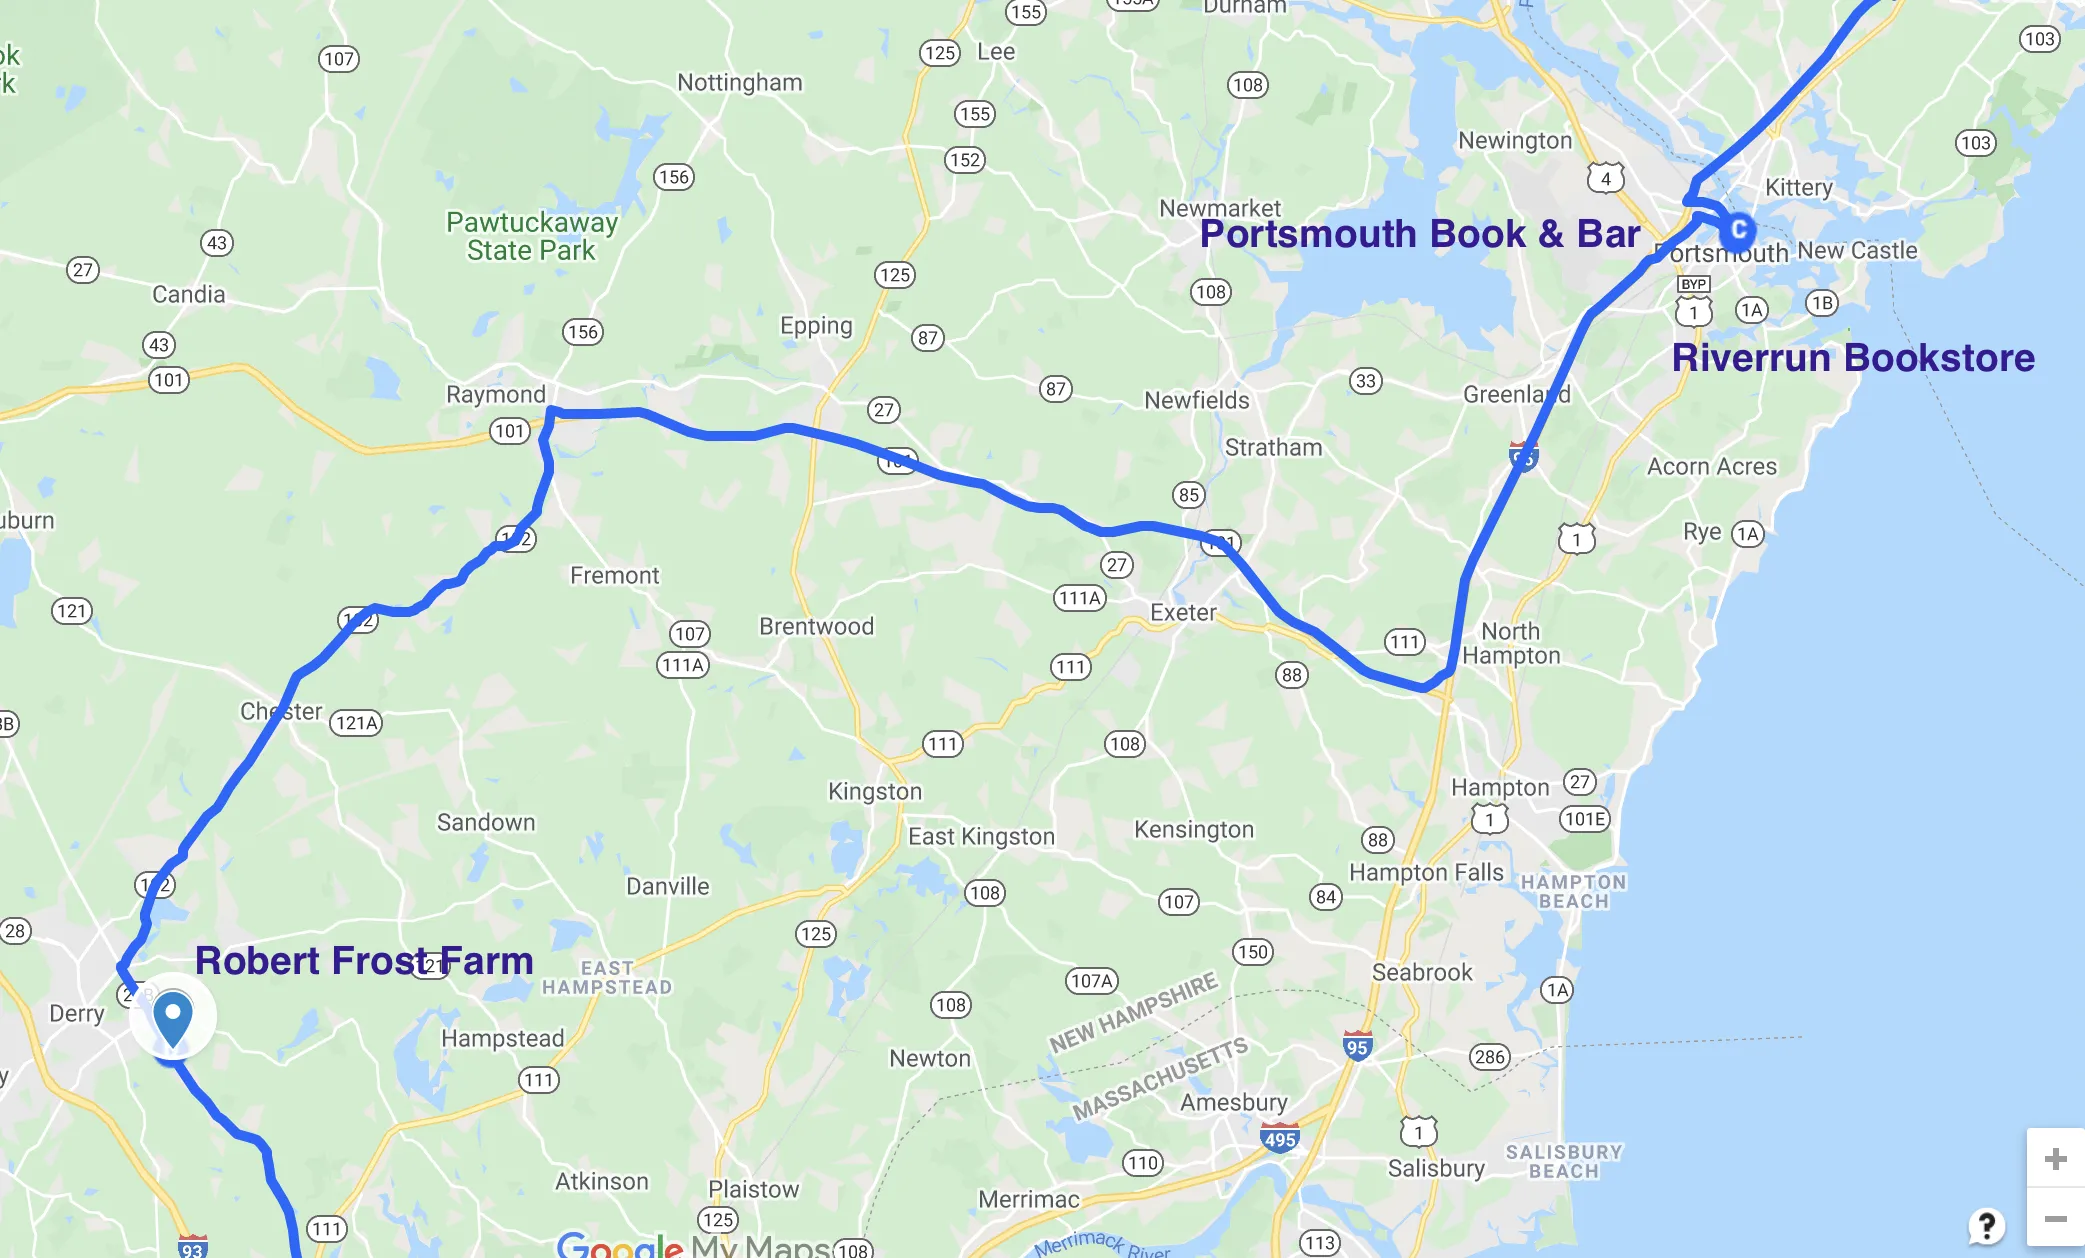 road map of literary stops in portsmouth and derry new hampshire